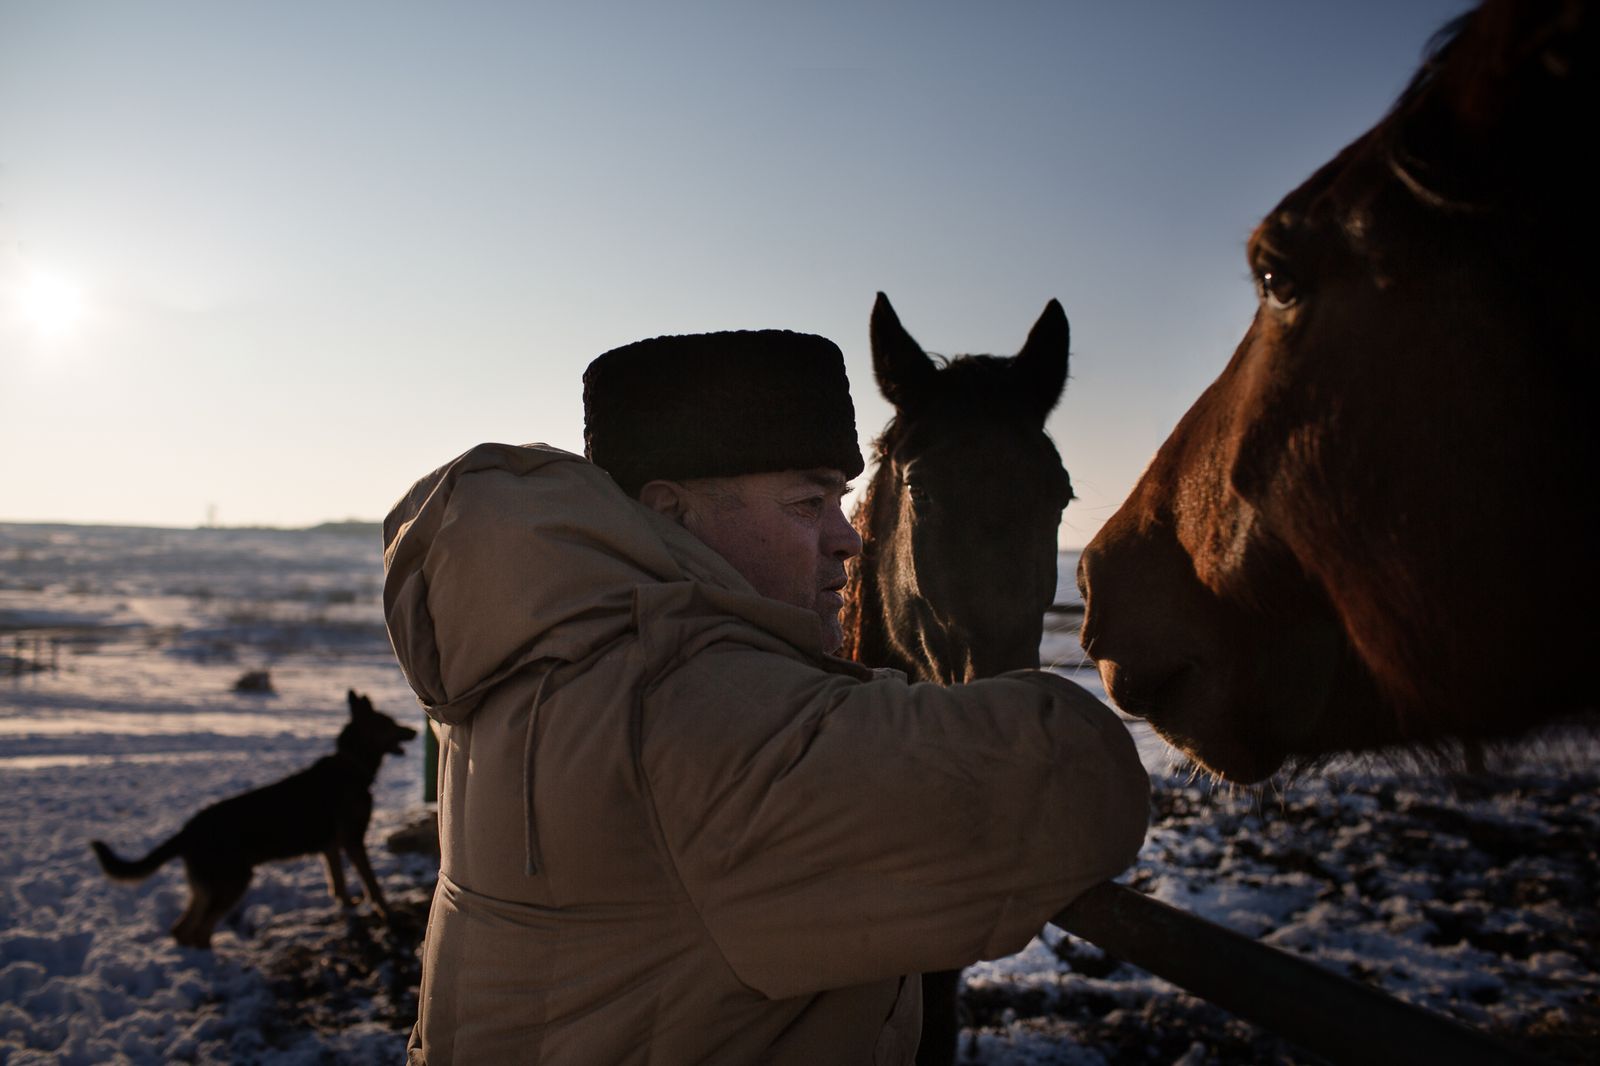 © Maurizio Gjivovich - Image from the Moldova - stories of life along the Dnestr river / February 2023 photography project